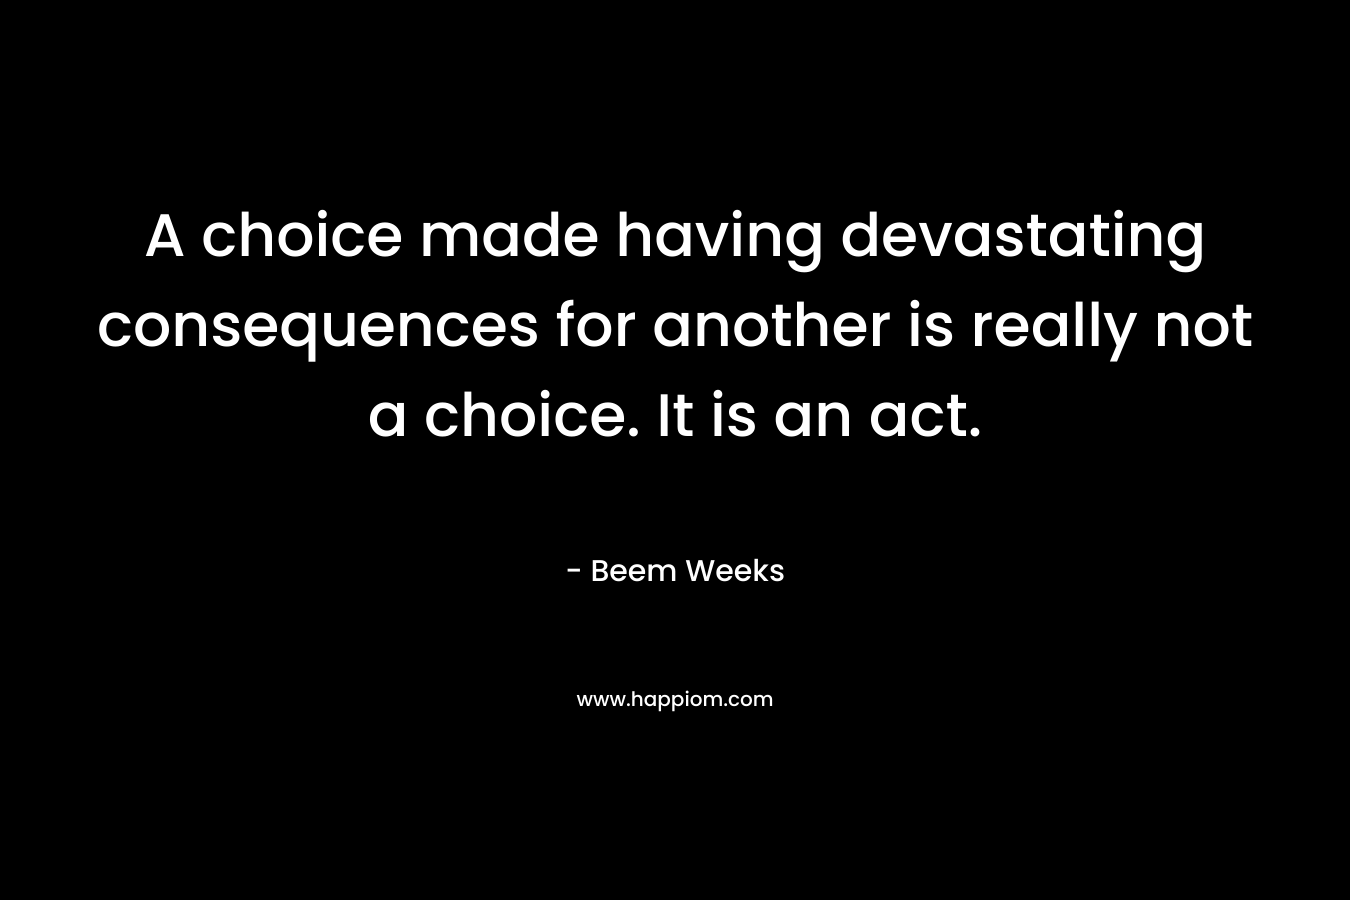 A choice made having devastating consequences for another is really not a choice. It is an act.